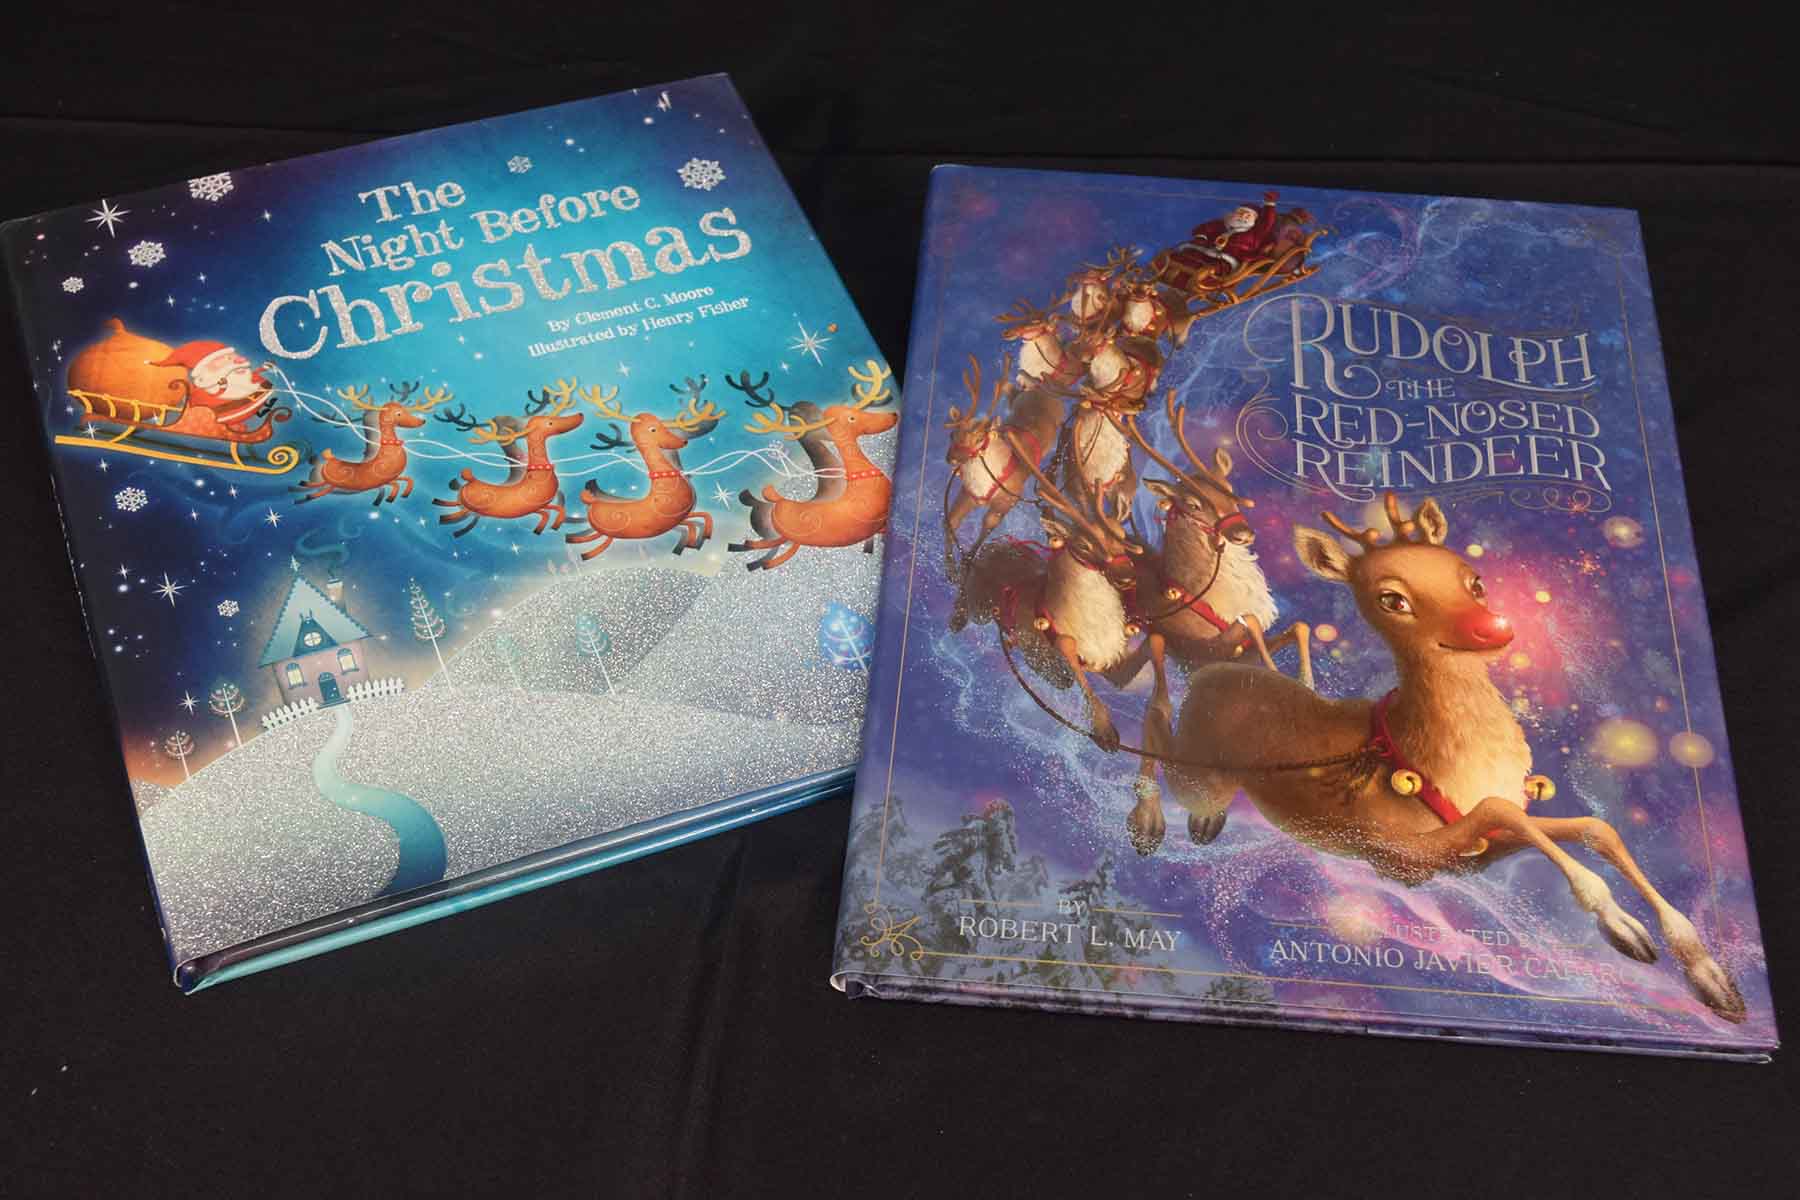 B4_Childrens_books_-_The_Night_before_Christmas_and_Rudolph_the_Red_Nose_Reindeer_ccml-pix_-_CCM.jpg